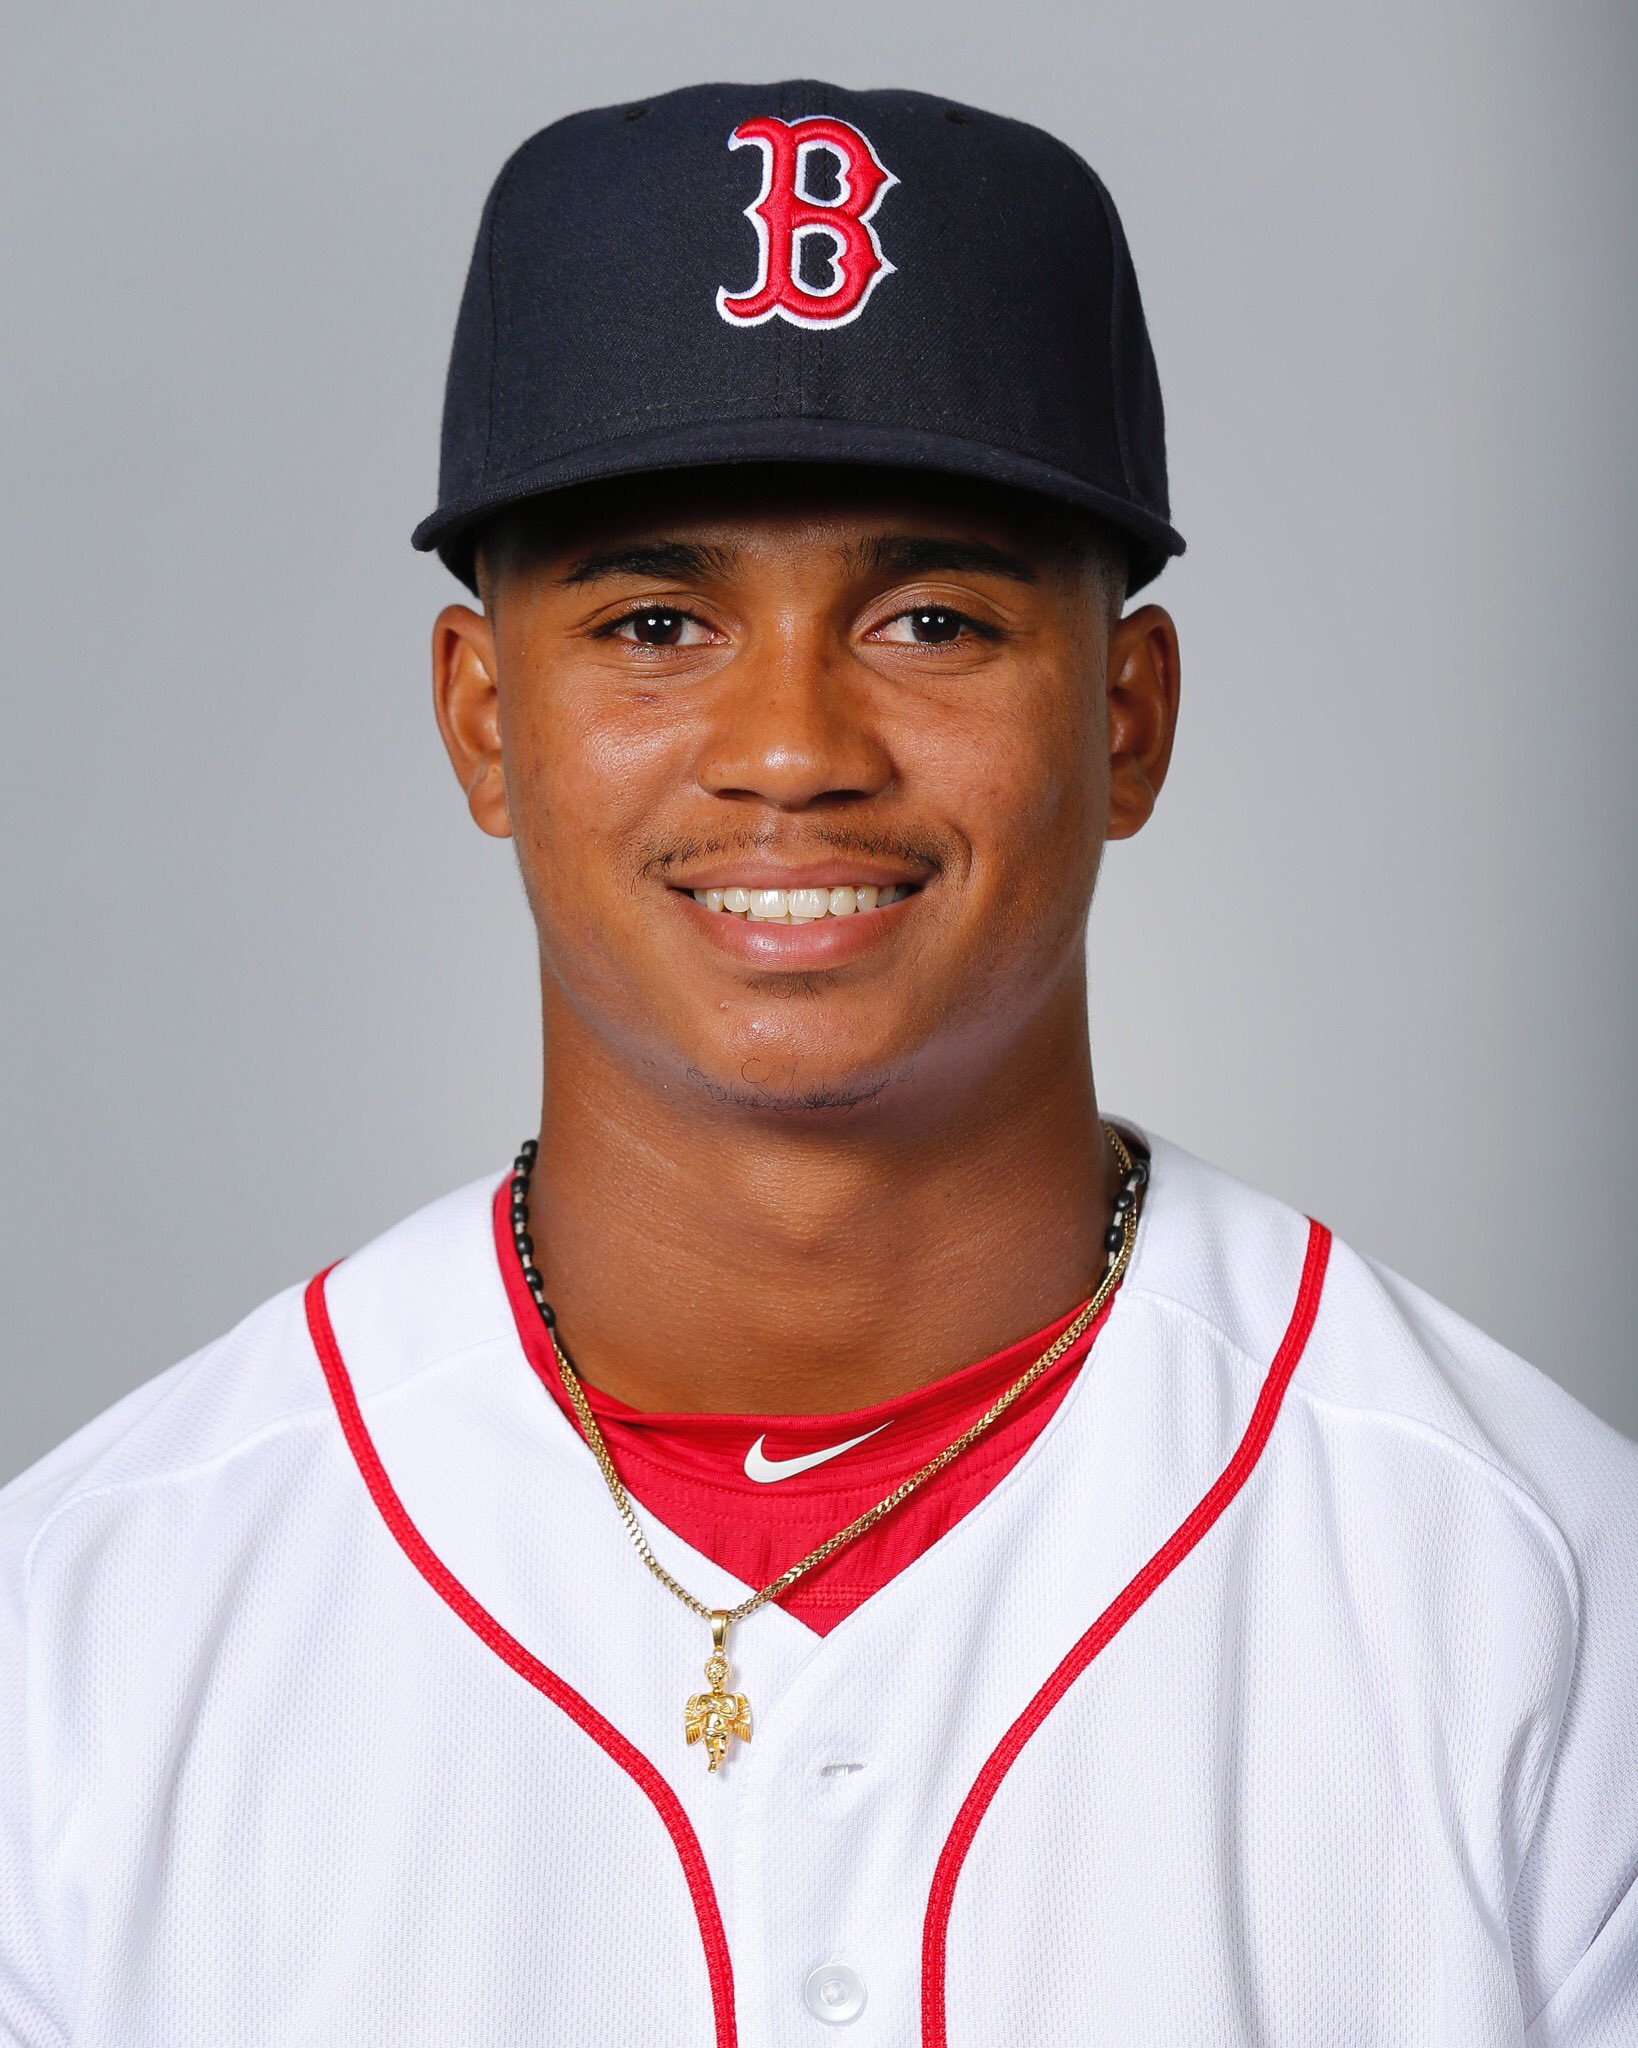 Passaic Public Schools on X: Teams all over MLB are starting their baseball  season, so count on Passaic being well represented. PHS Class of 2015  Nilolyn 'Nilo' Rijo, @thejuicebro is making us